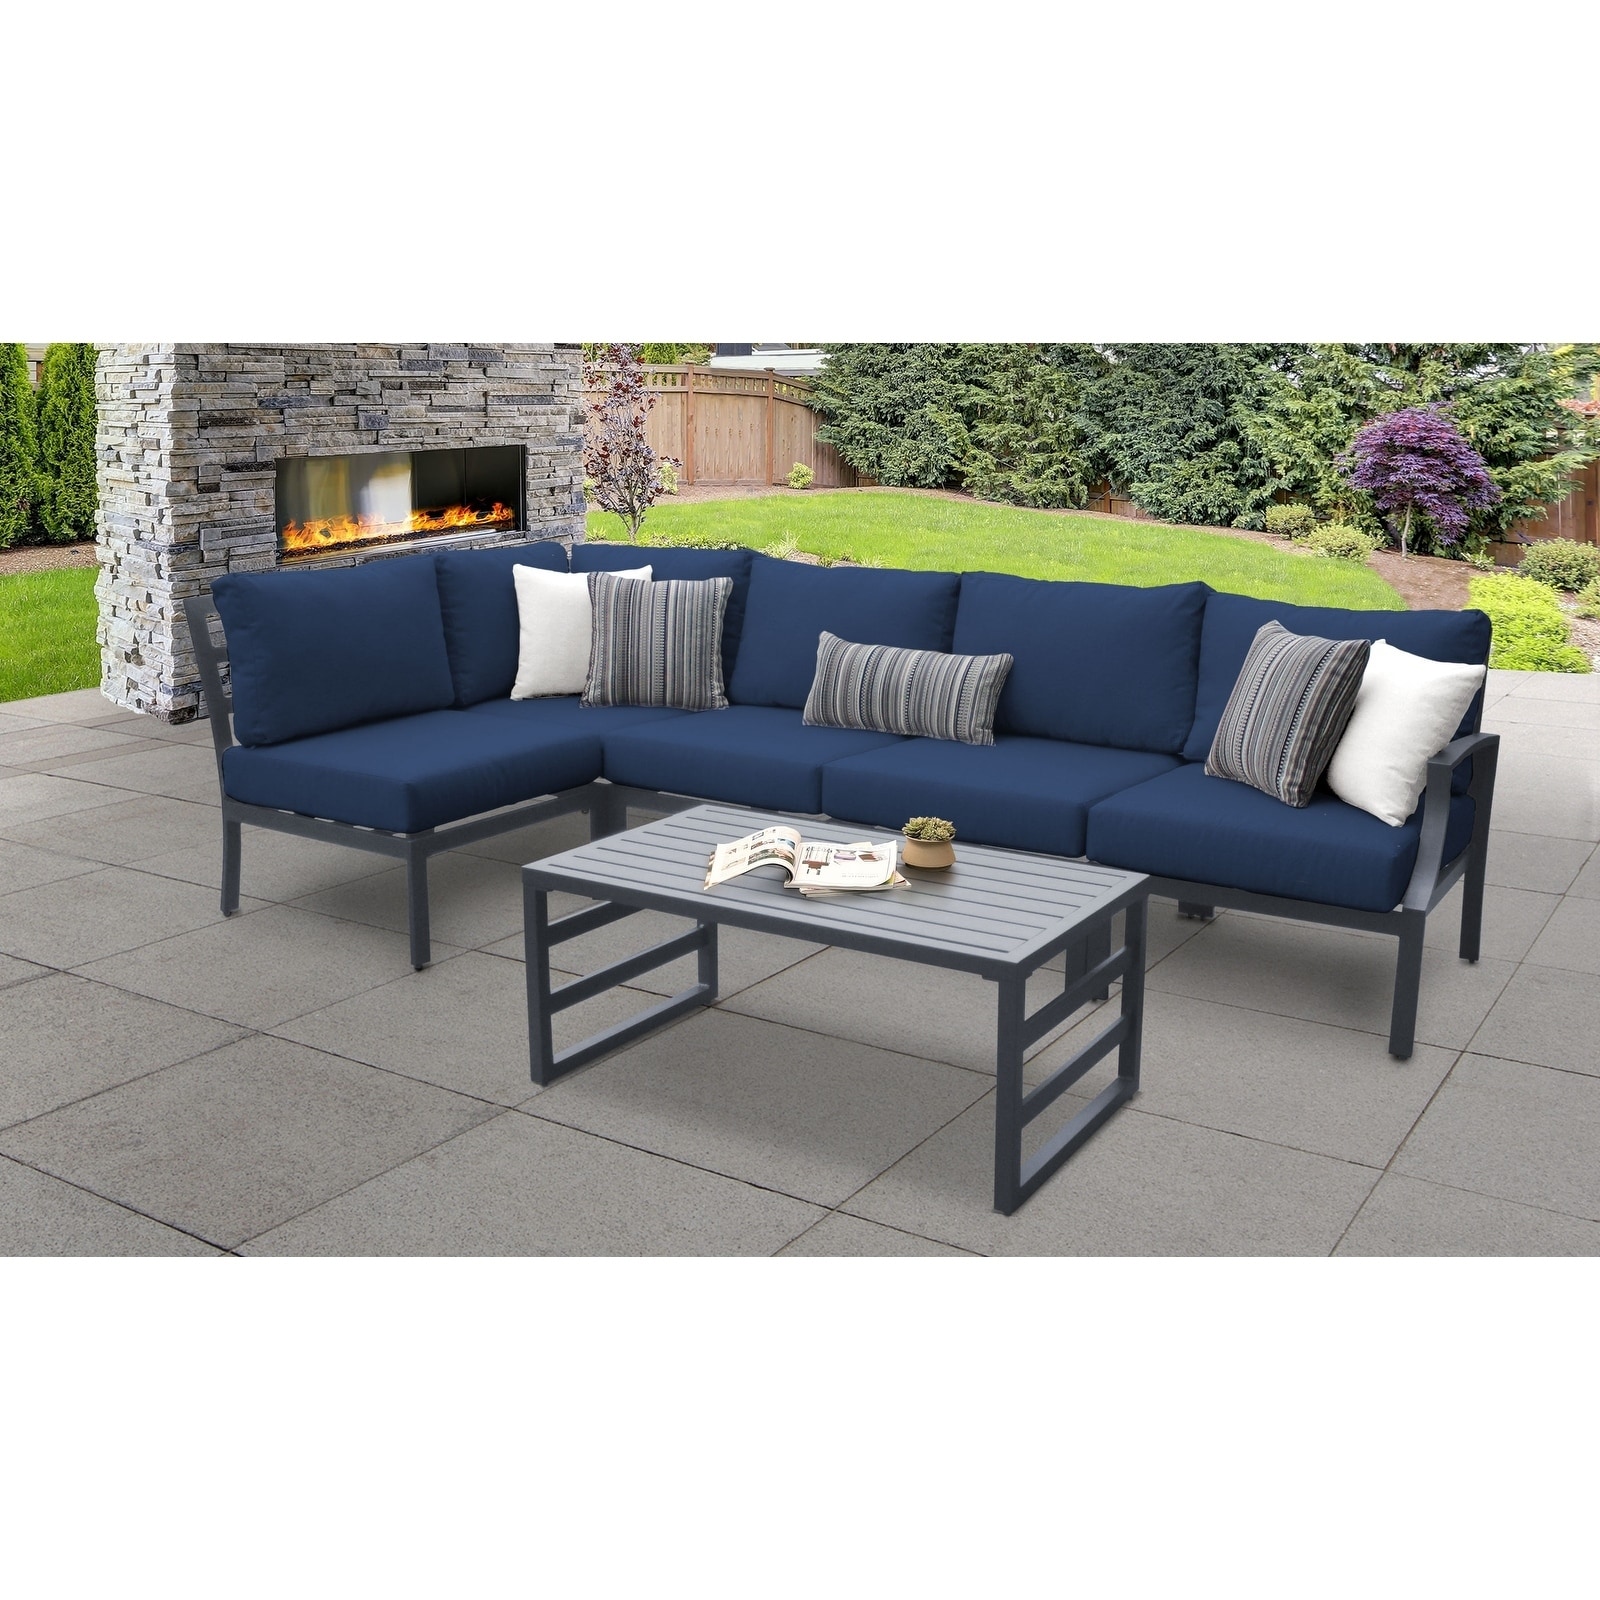 Moresby 6-piece Outdoor Aluminum Patio Furniture Set 06q By Havenside Home